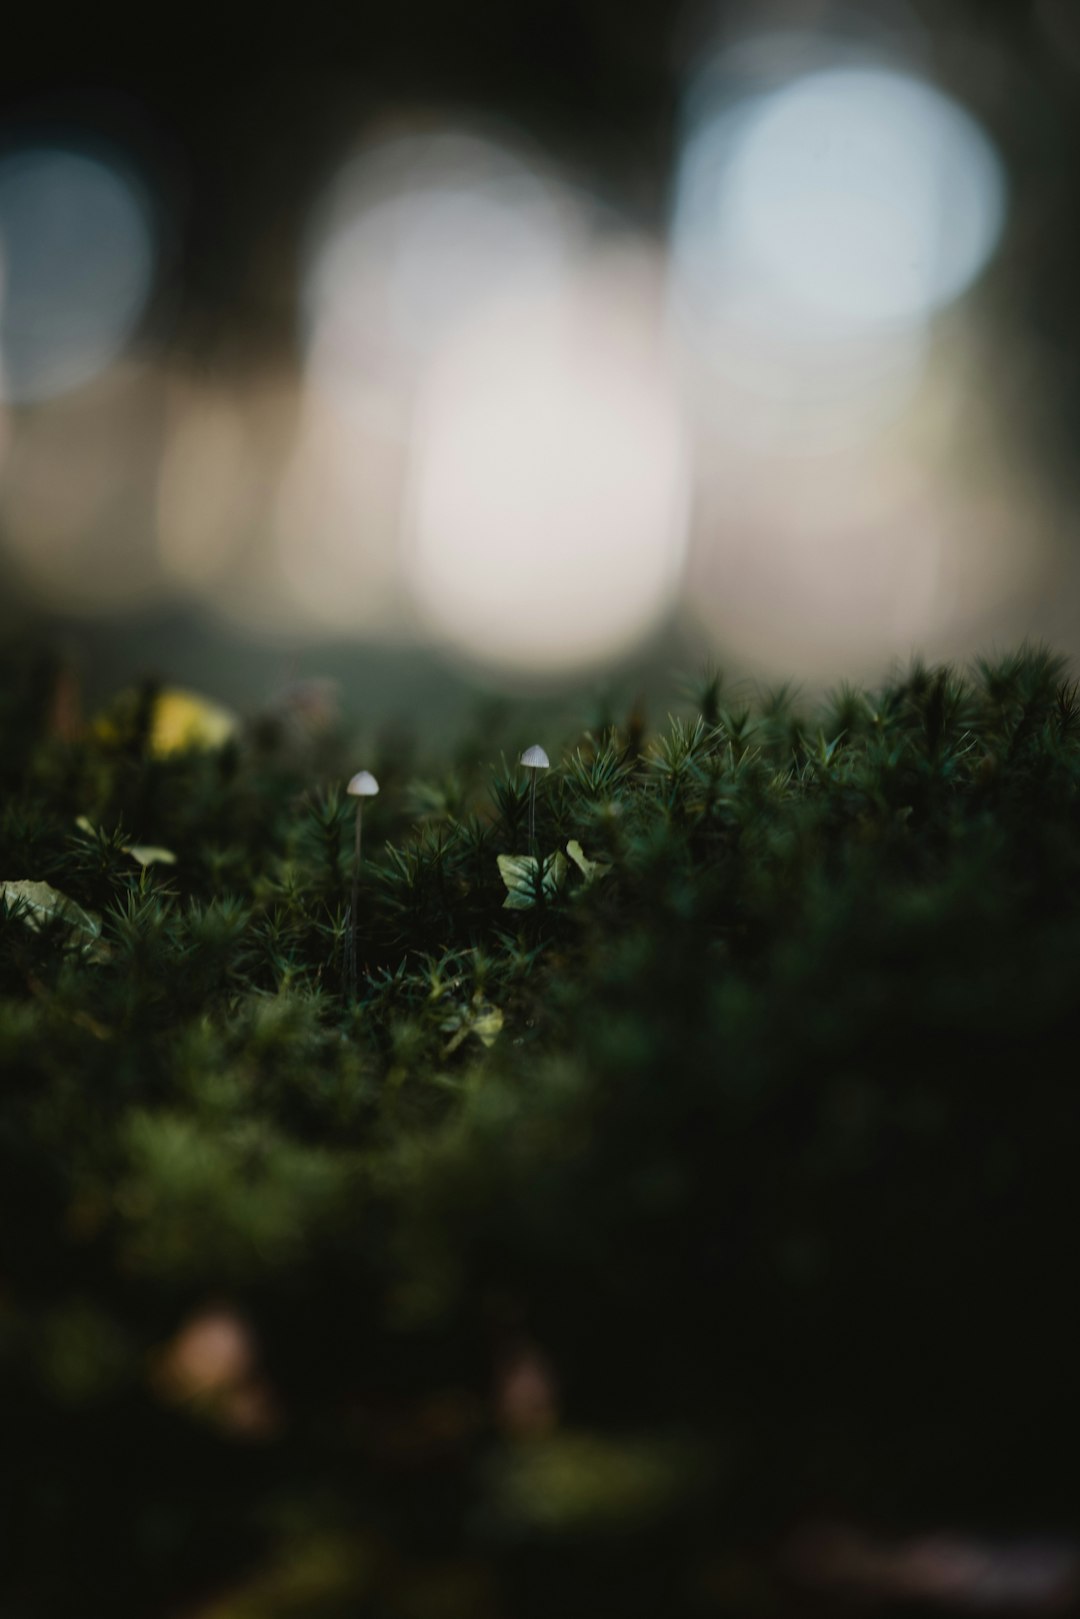 selective focus photography of green grass field